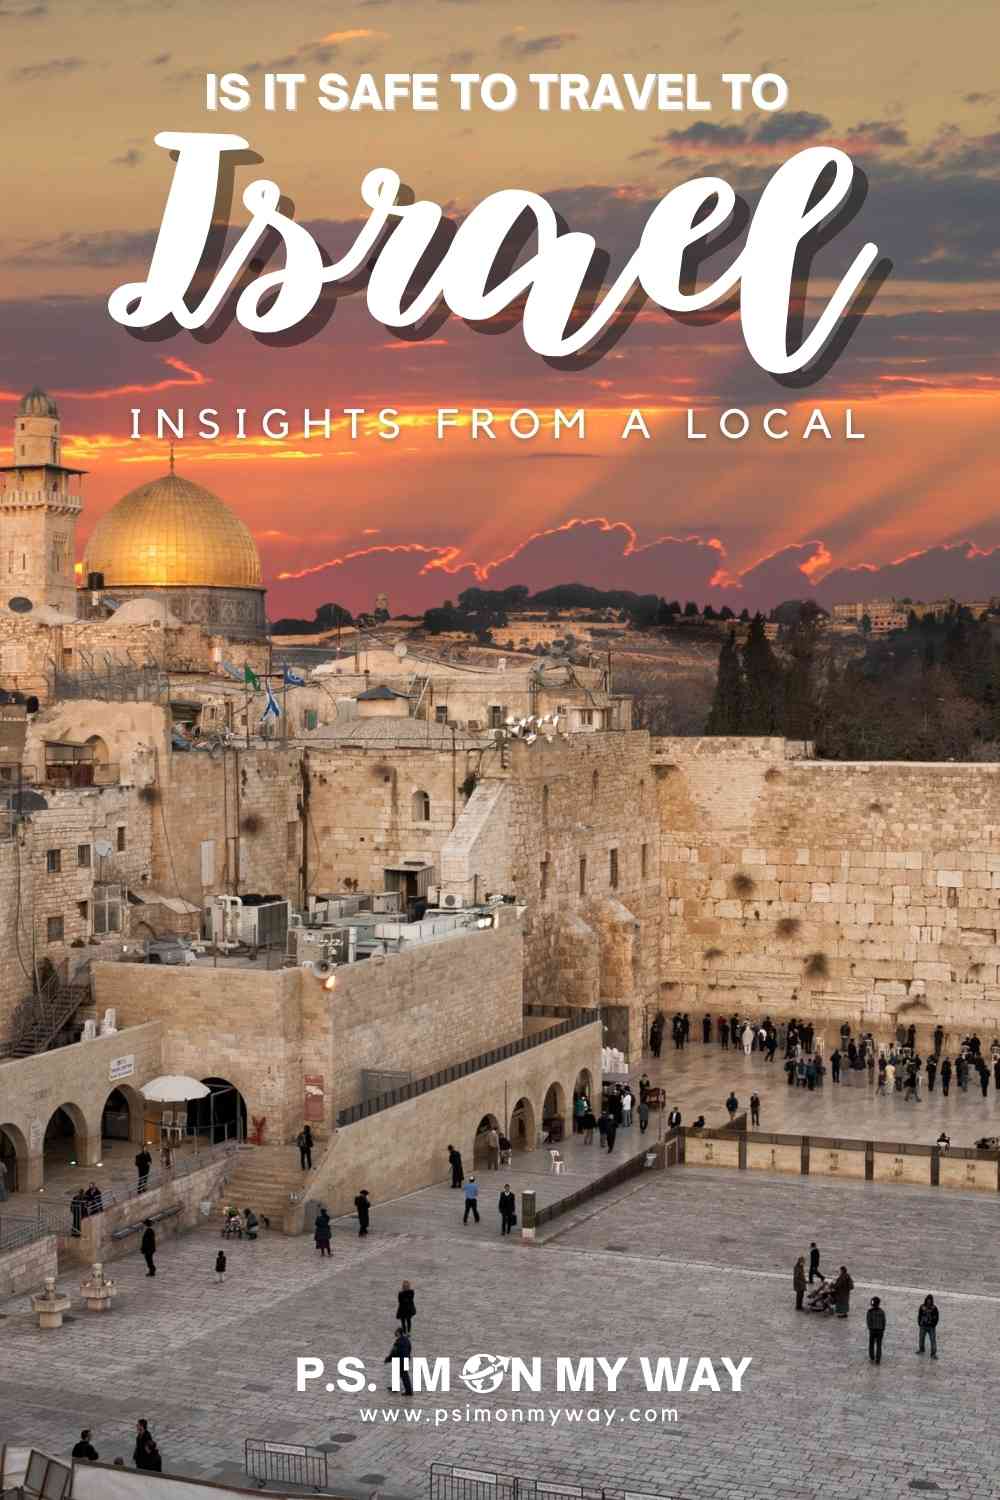 Is it safe to travel to Israel